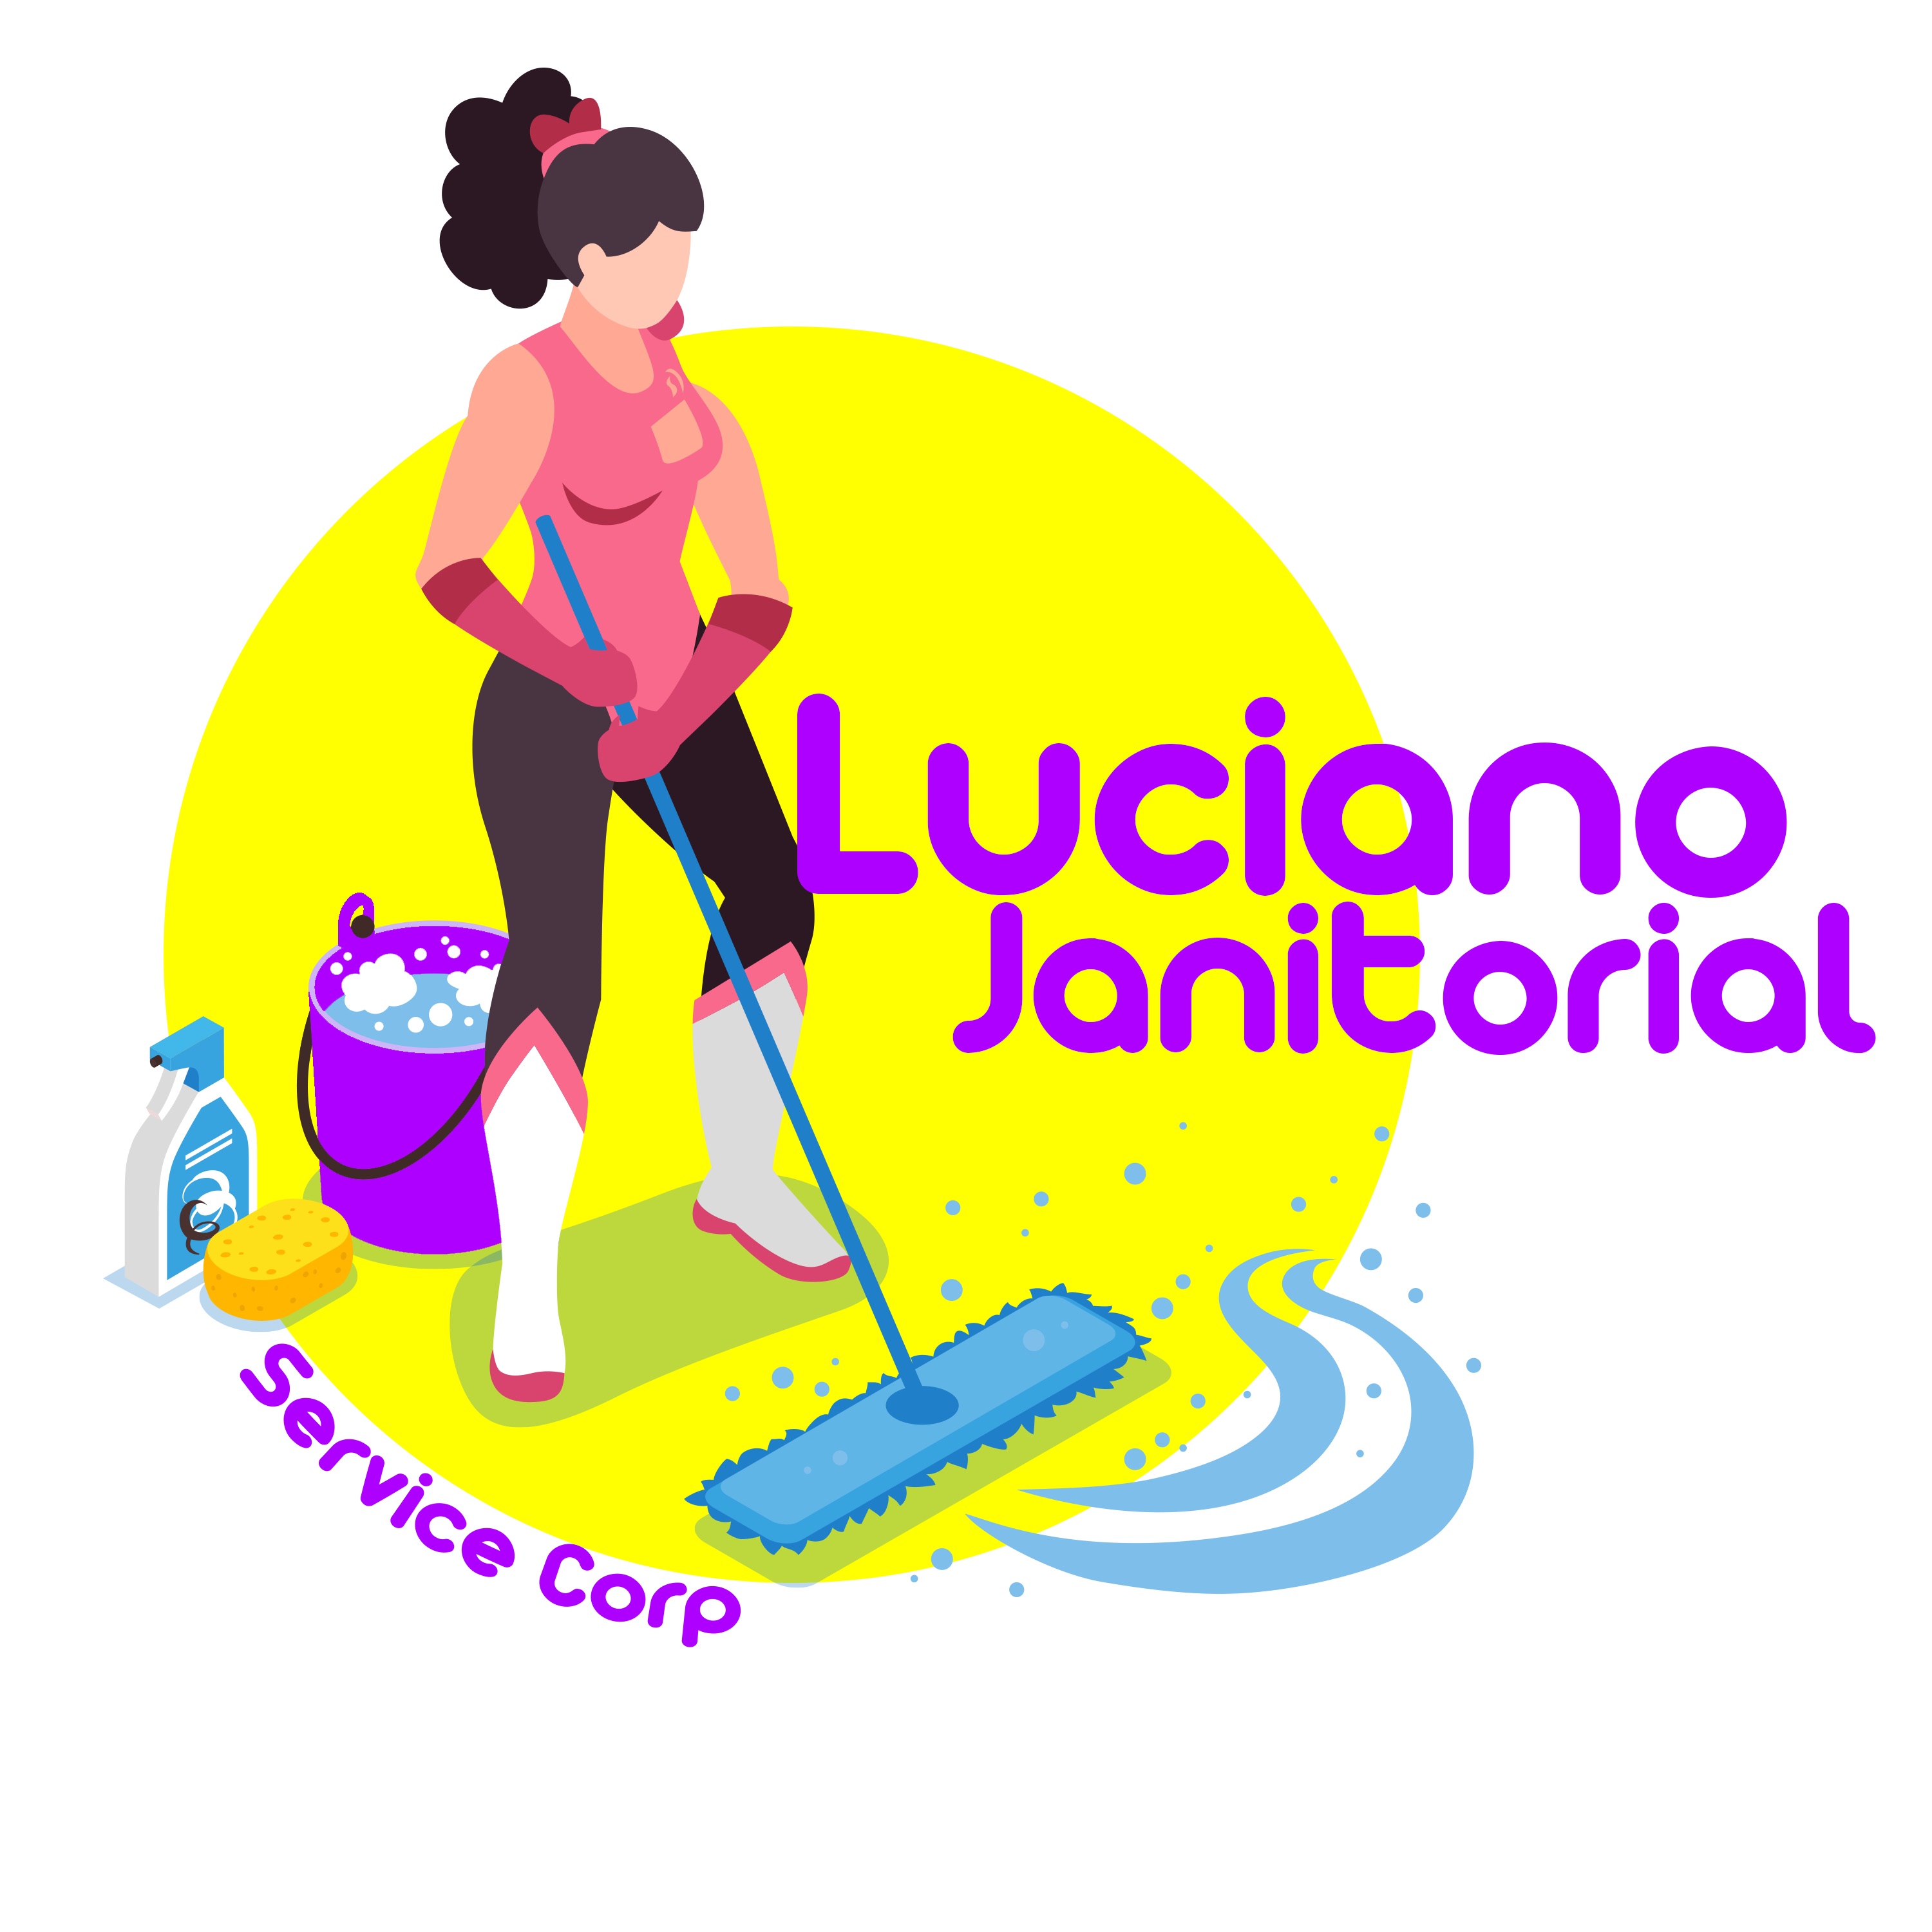 Luciano Janitorial Service Logo